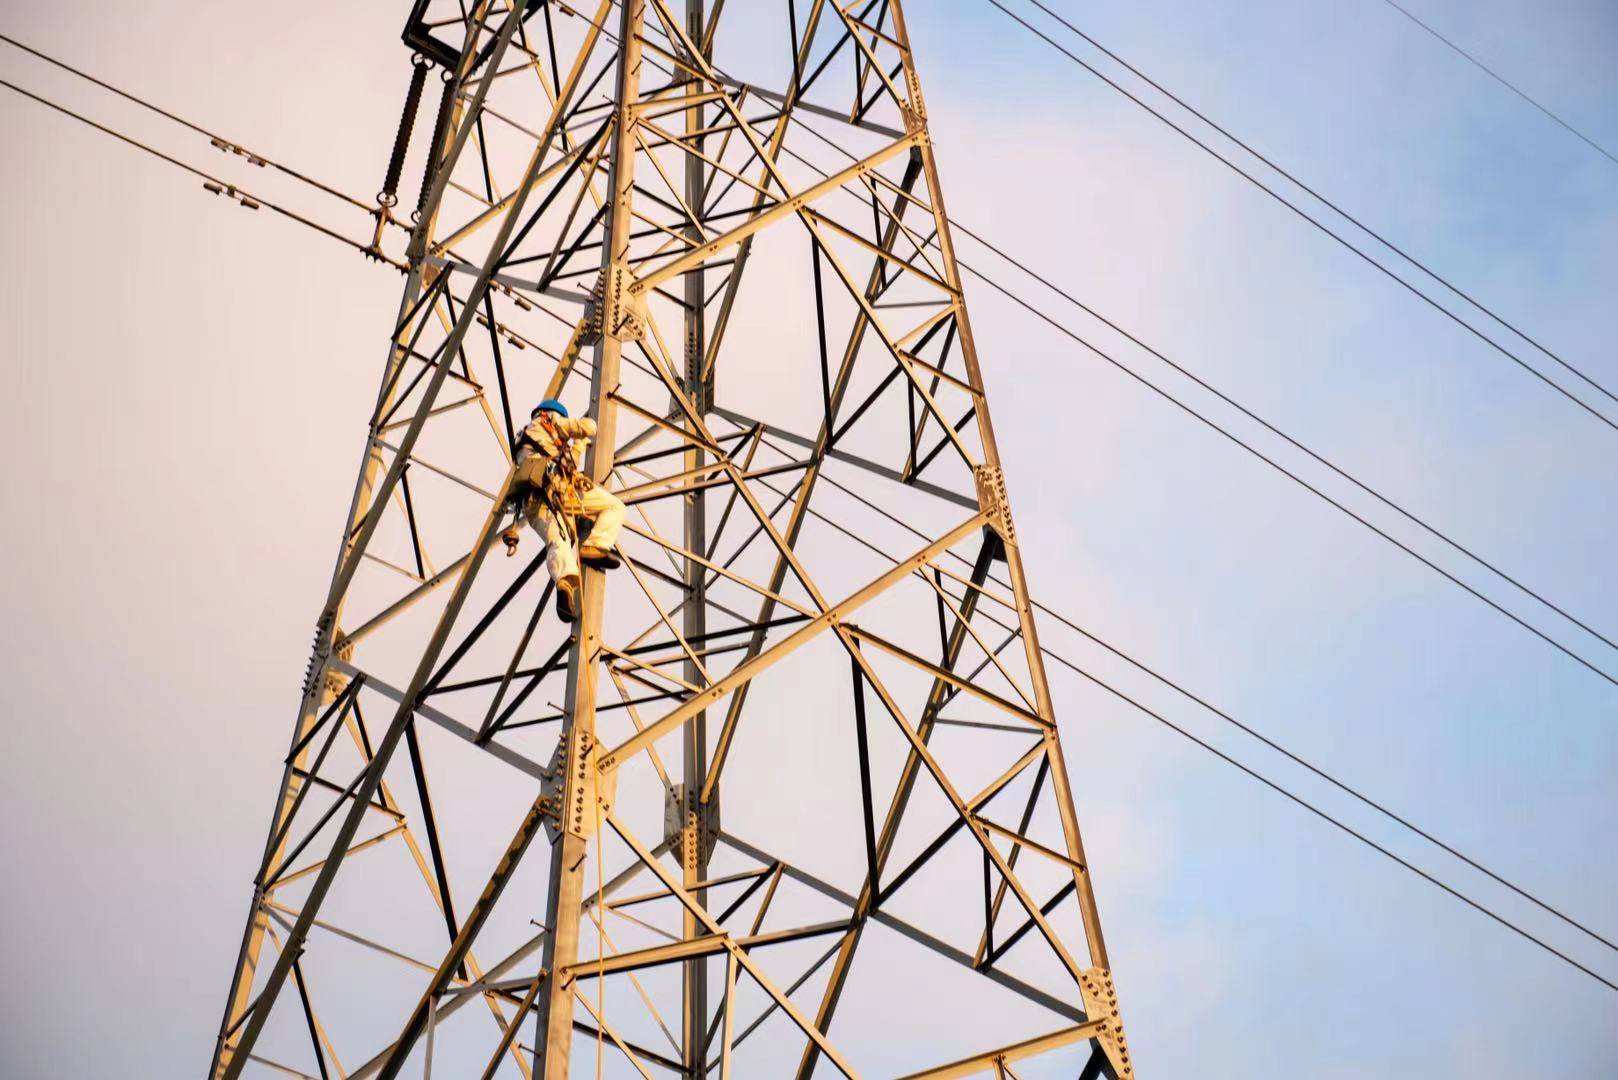 COLD-FORMED STEEL SECTION FOR TRANSMISSION TOWERS